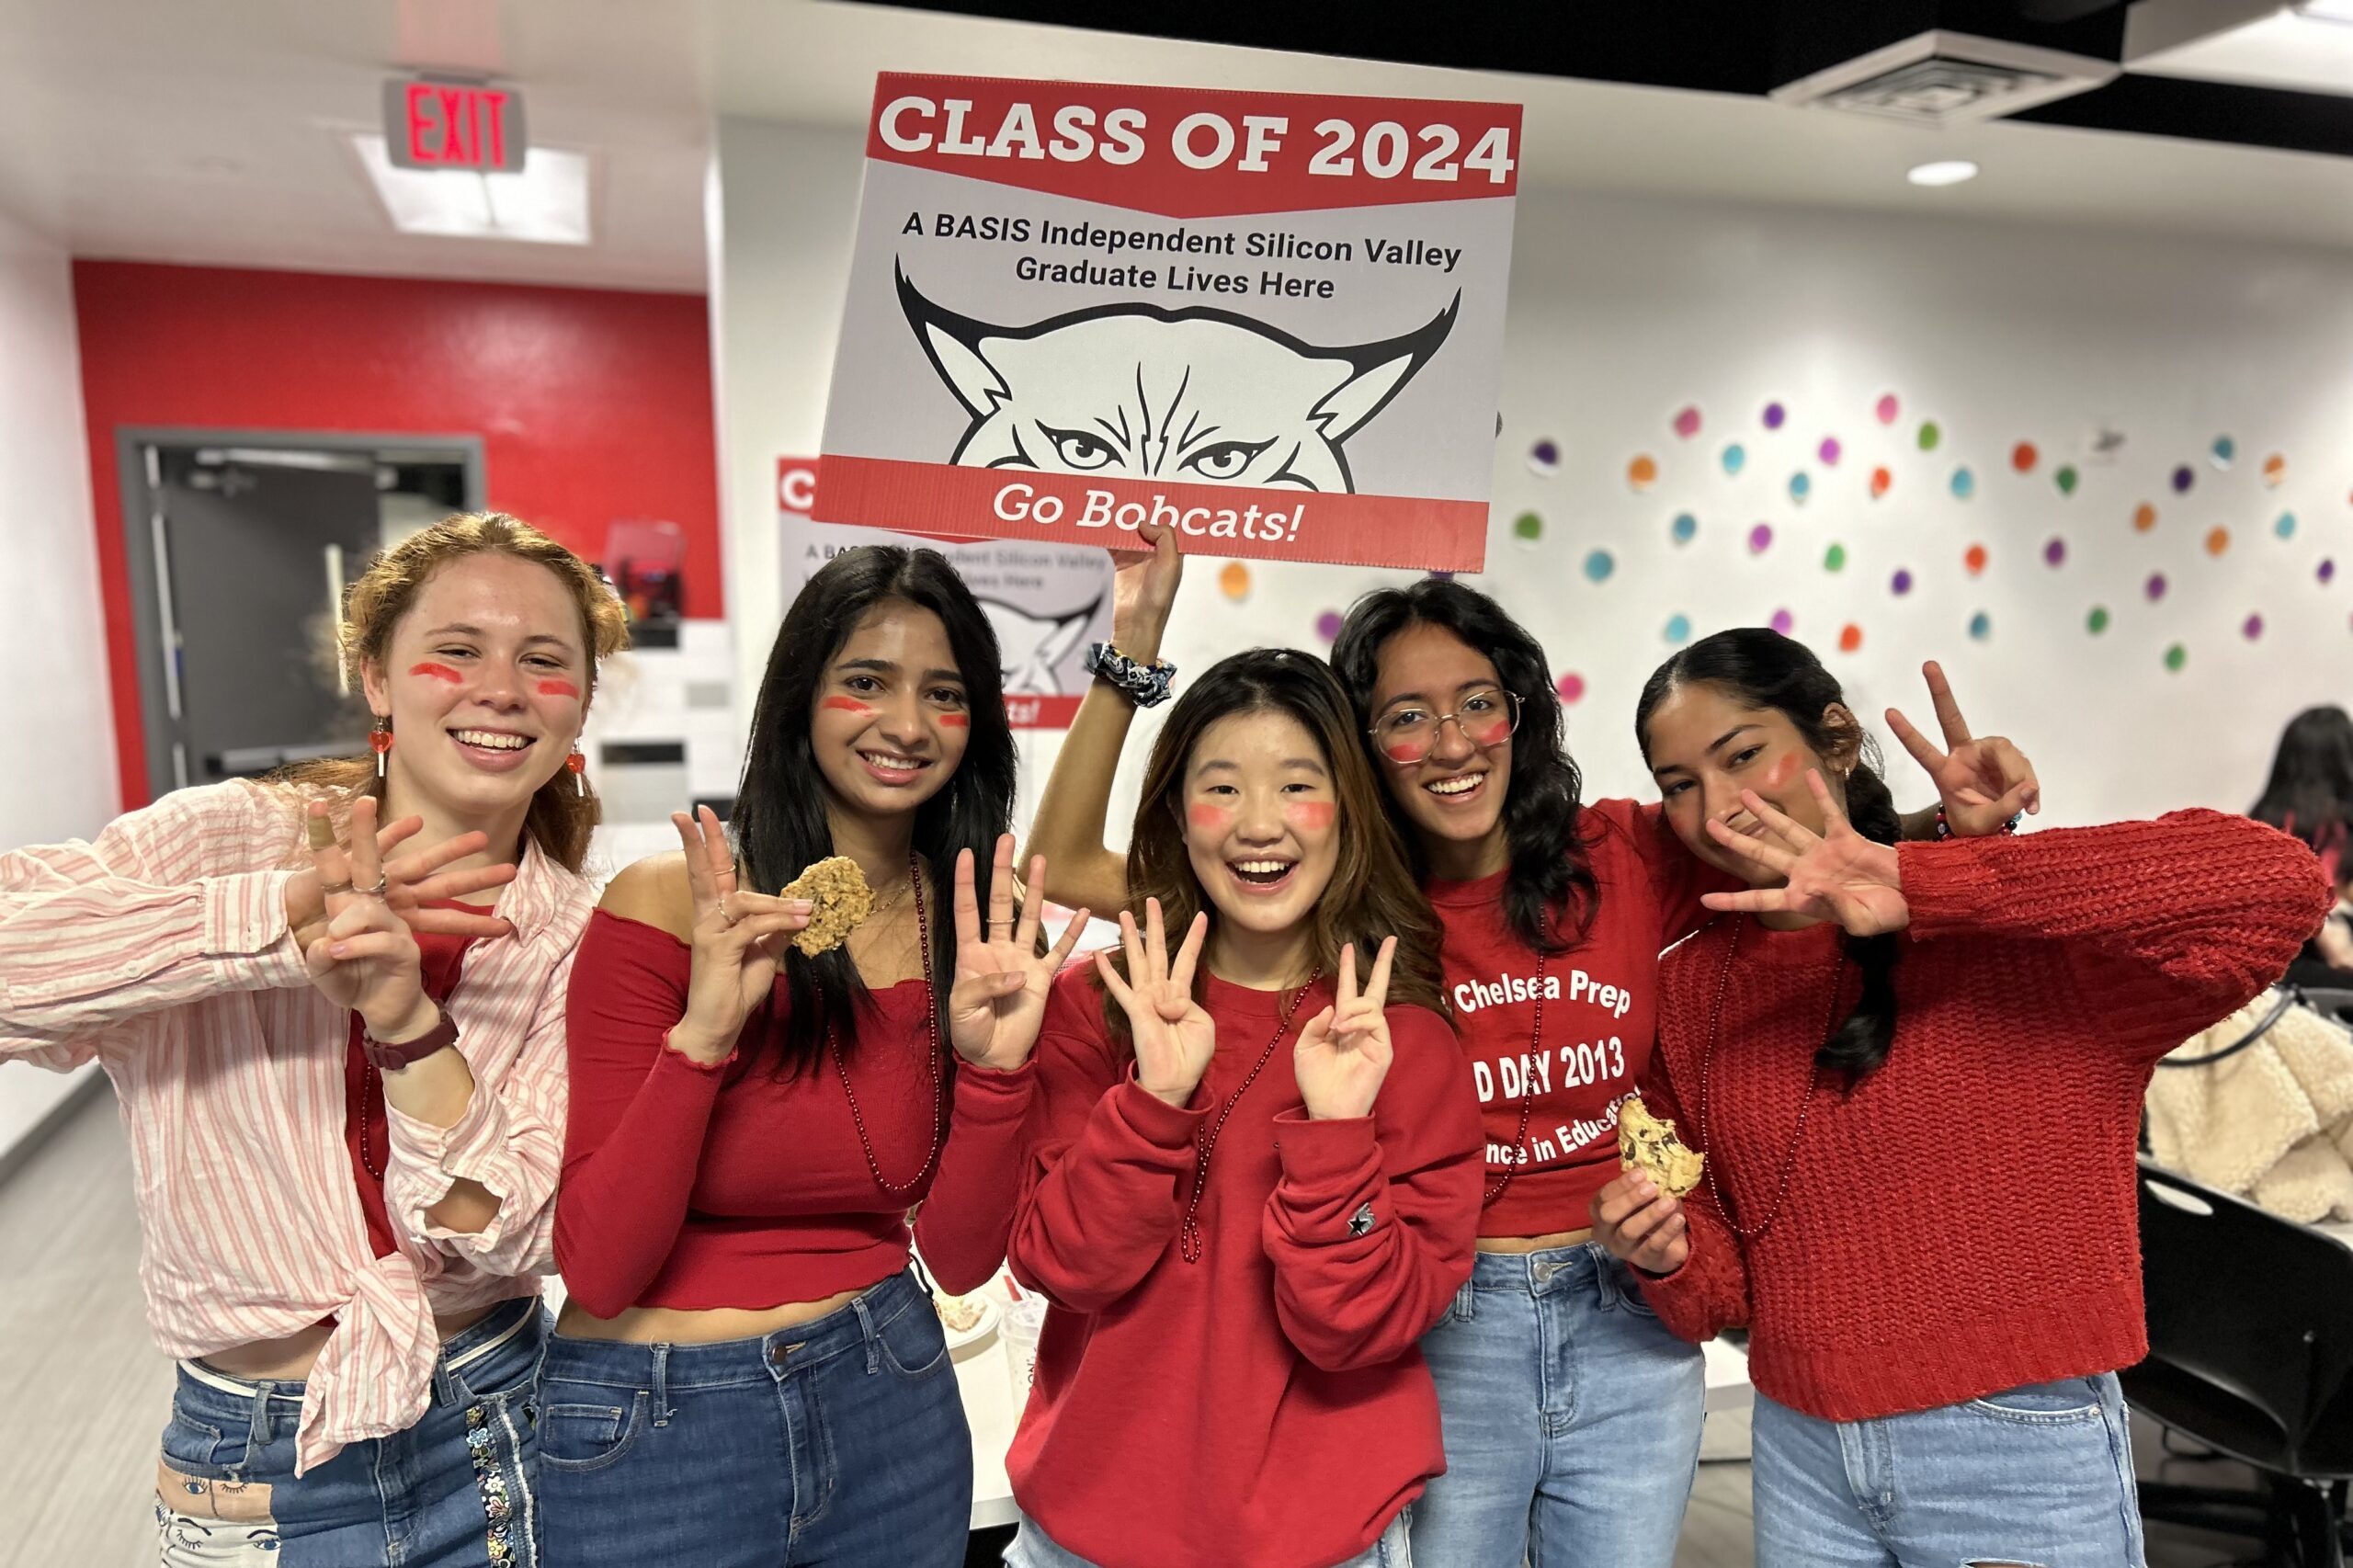 Featured Image for BASIS Independent Silicon Valley's Class of 2024 College Acceptances